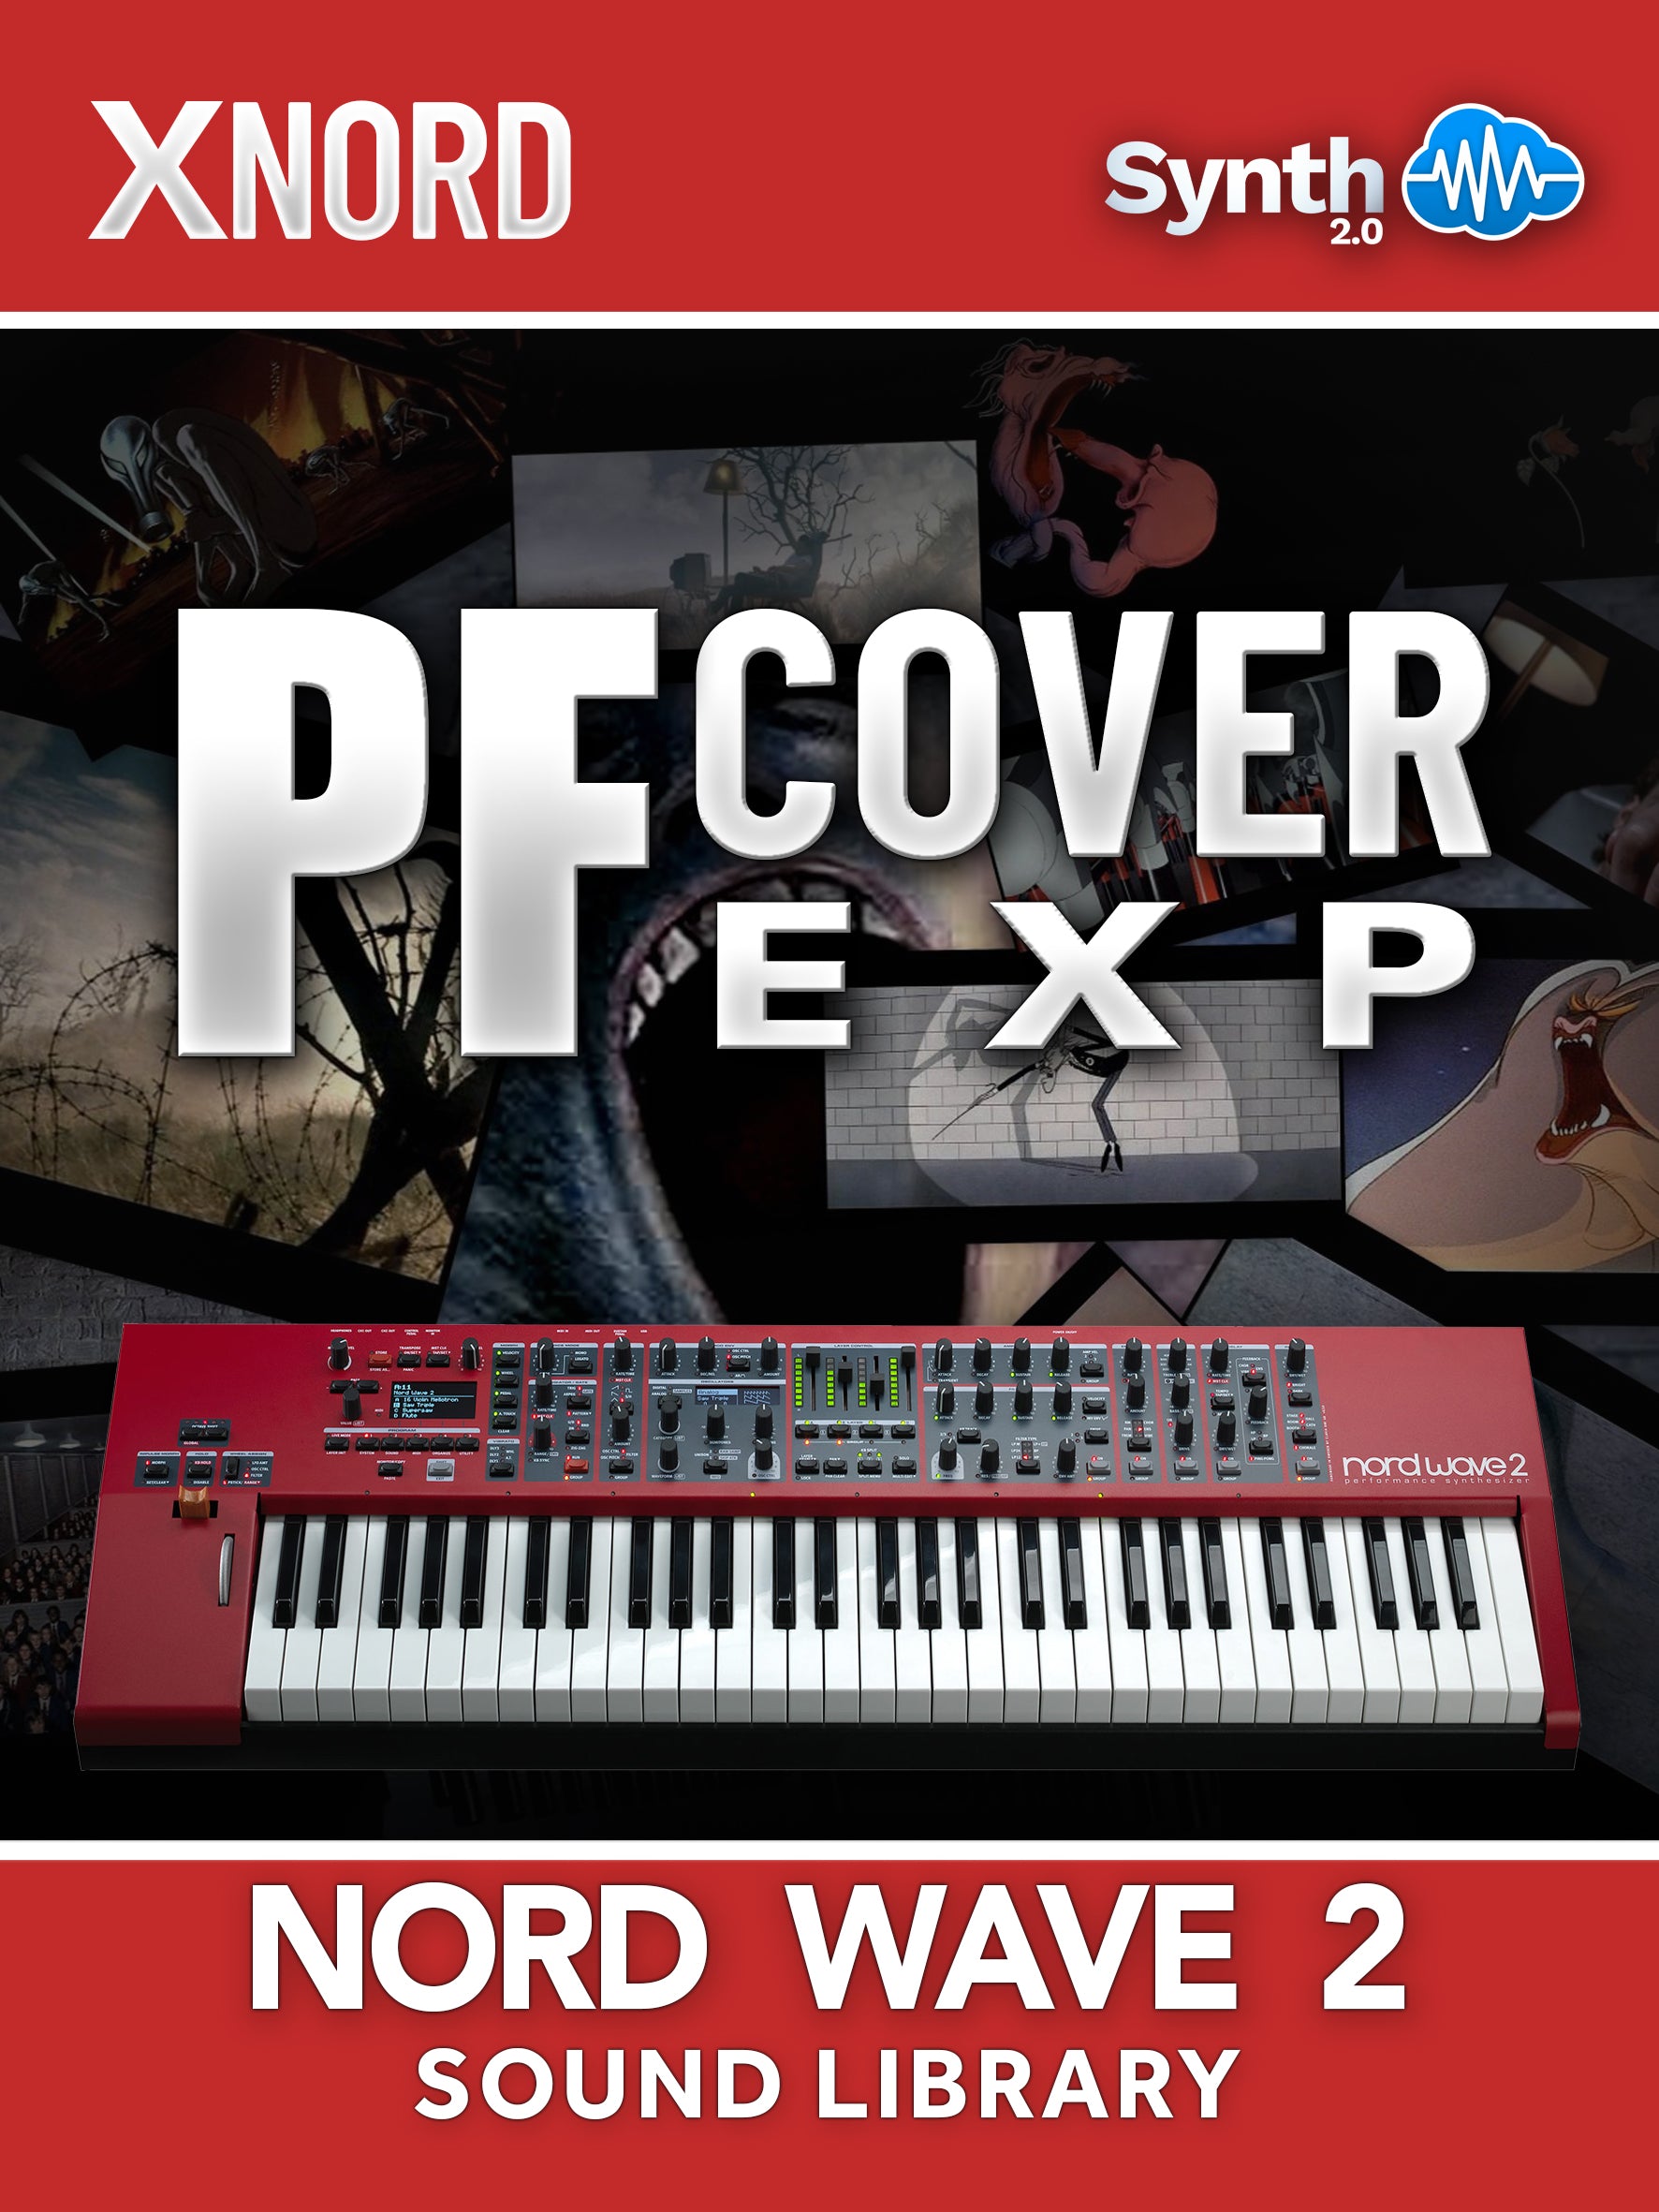 FPL004 - PF Cover EXP - Nord Wave 2 ( 40 presets )